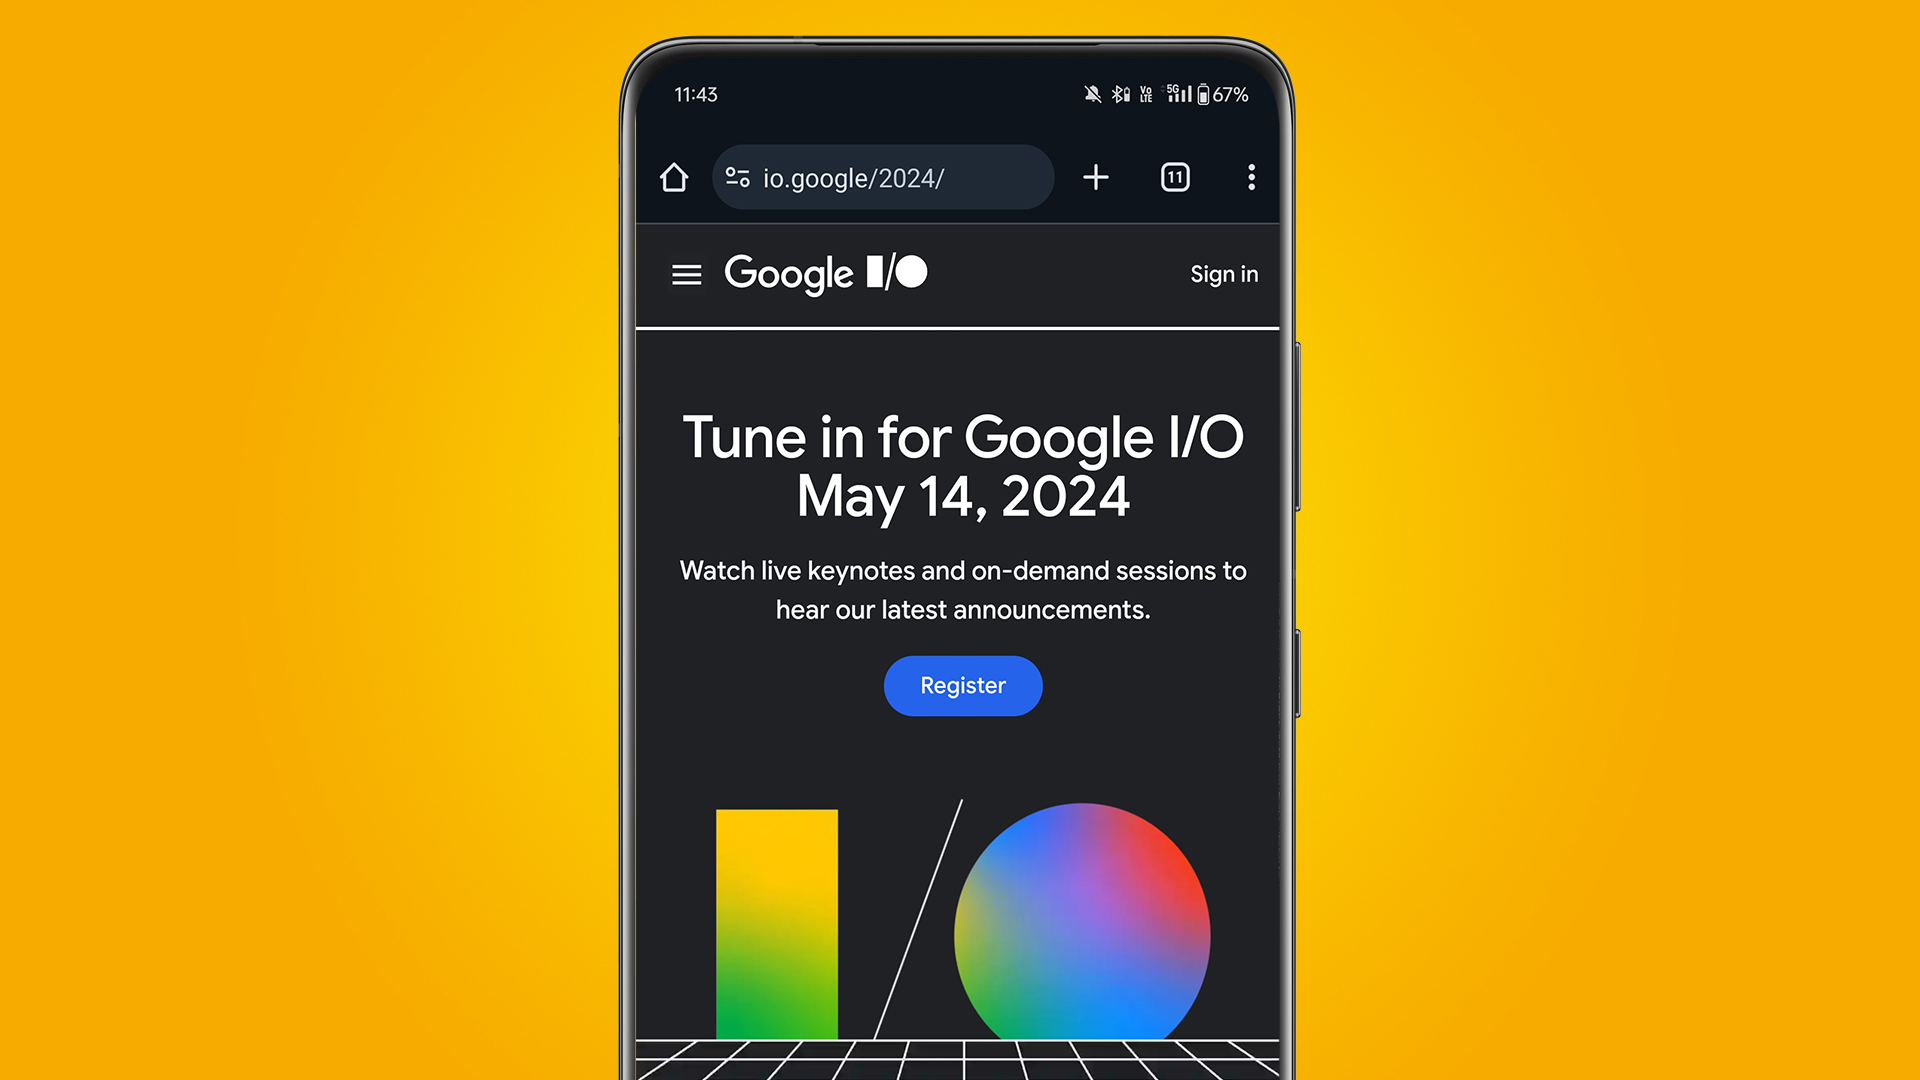 A phone on an orange background showing the Google I/O 2024 homepage